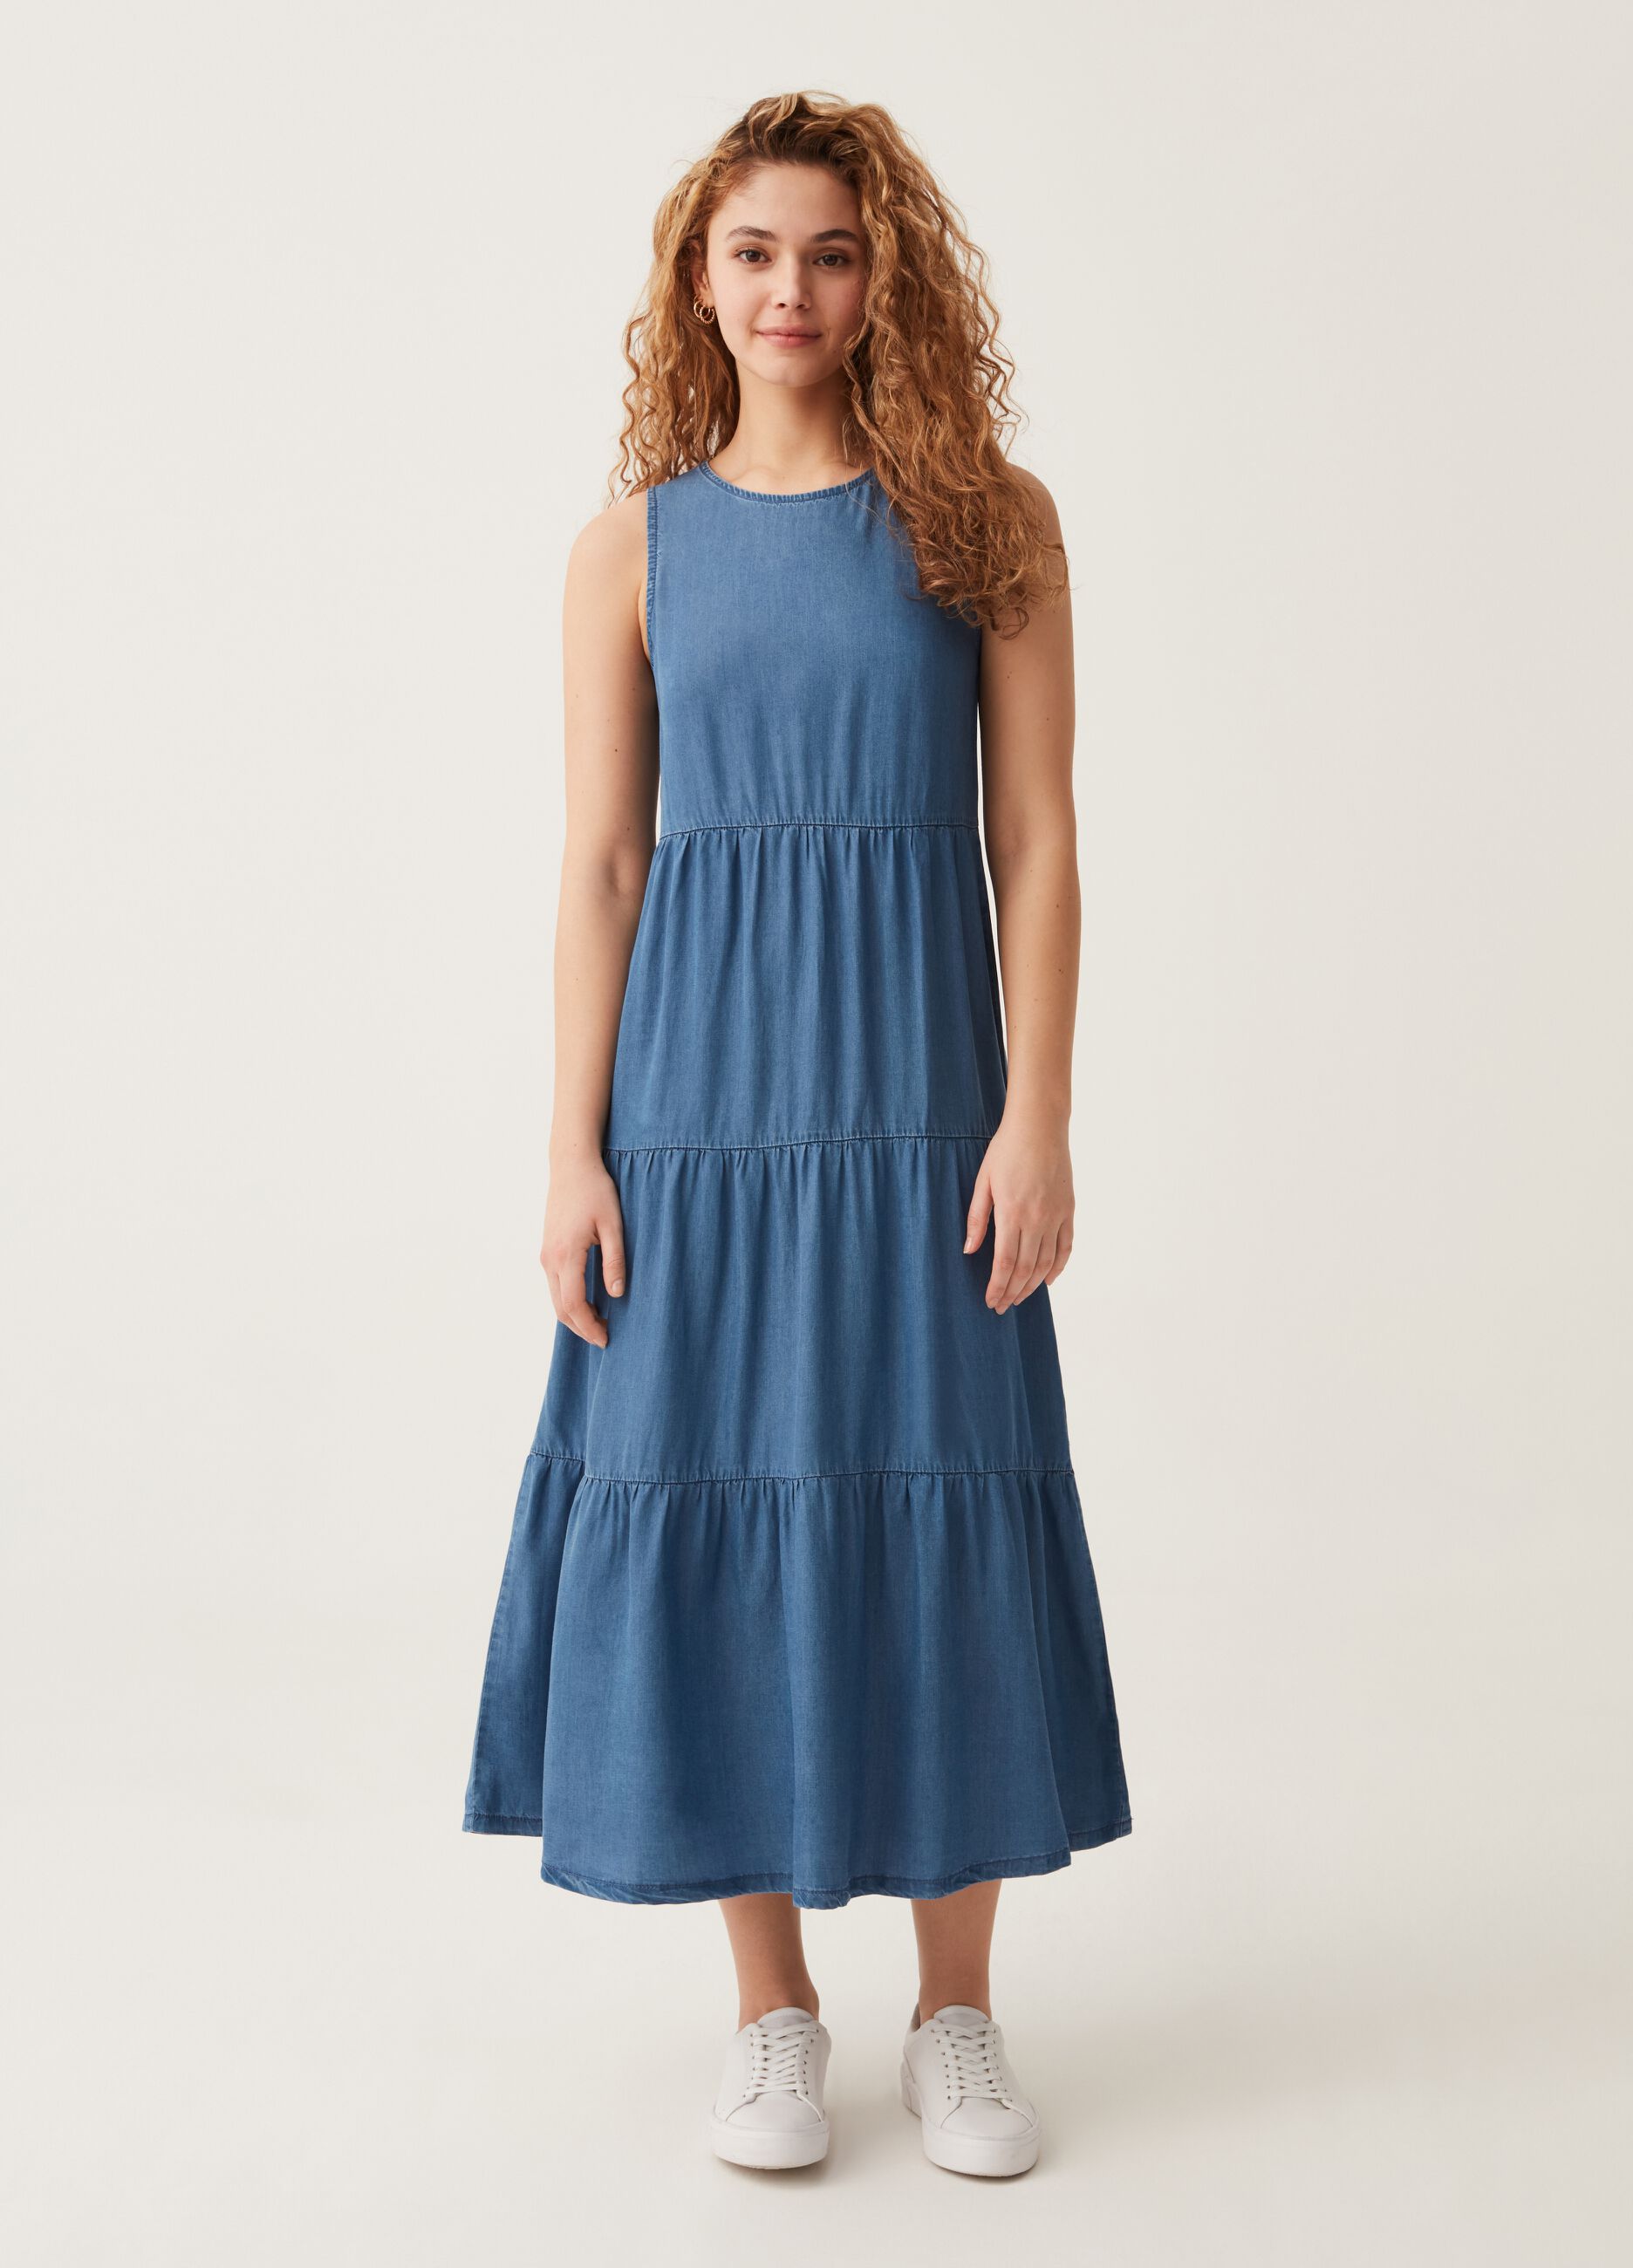 Tiered dress with denim effect